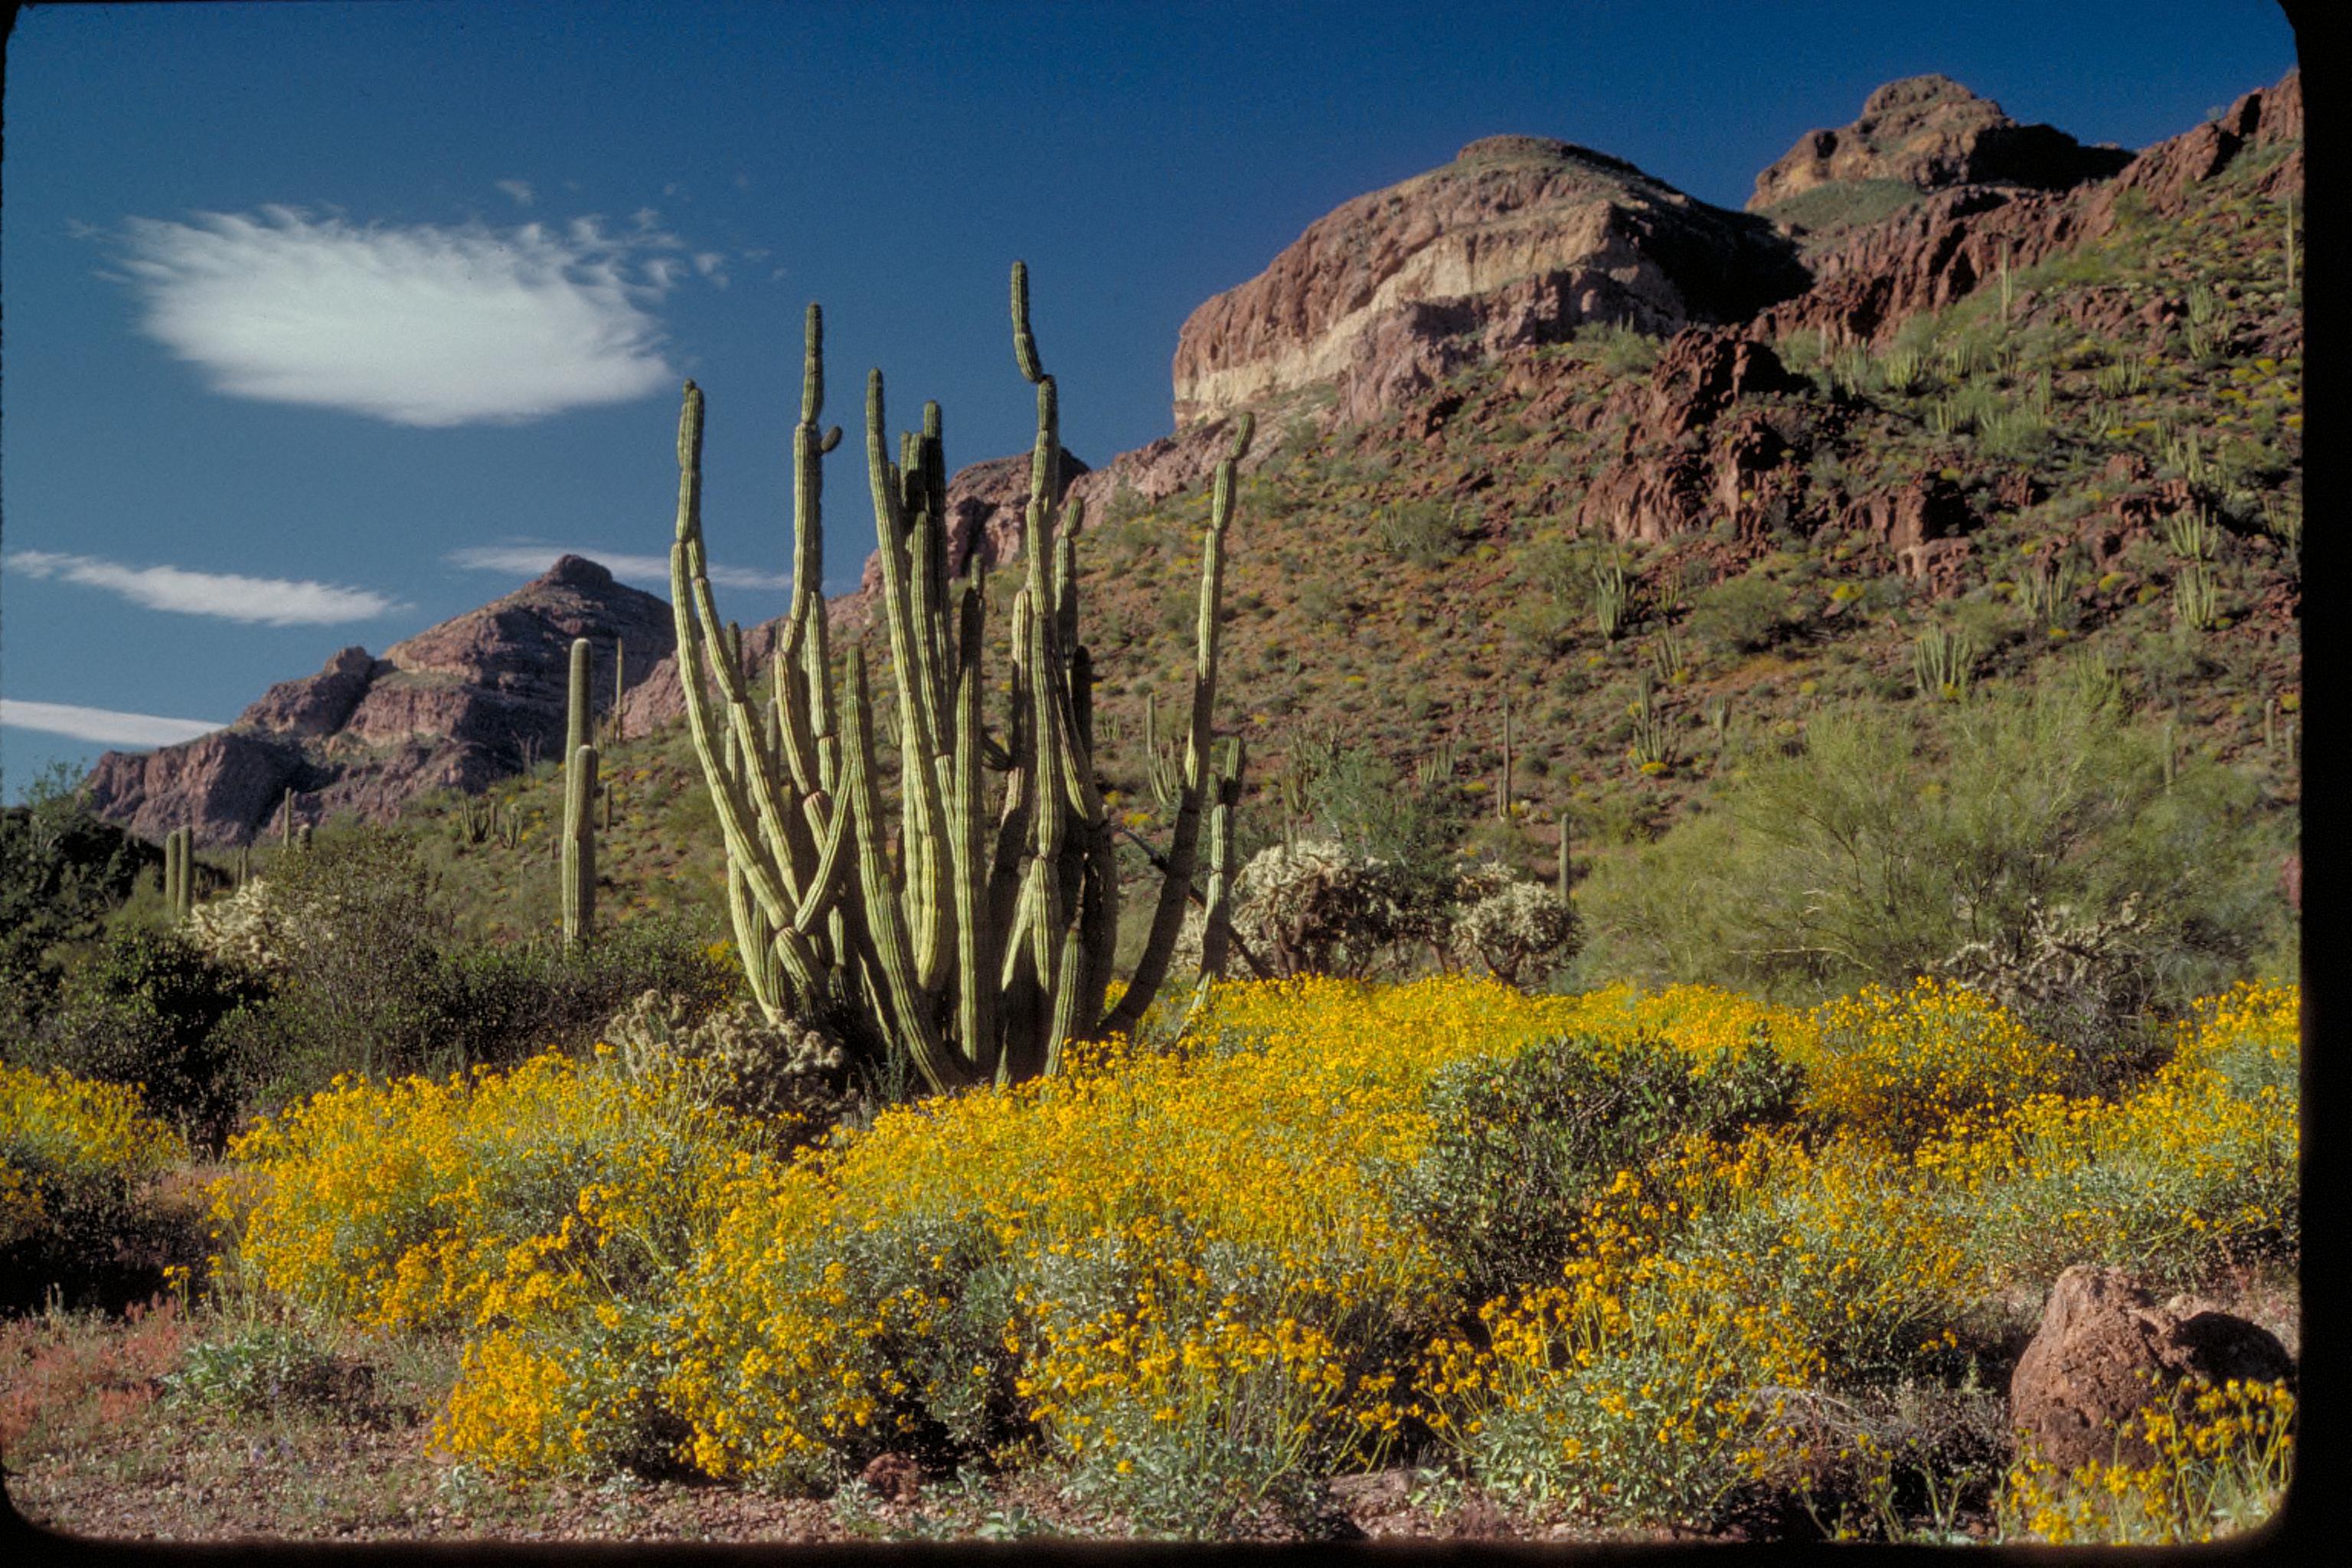 Snakes - Organ Pipe Cactus National Monument (U.S. National Park Service)